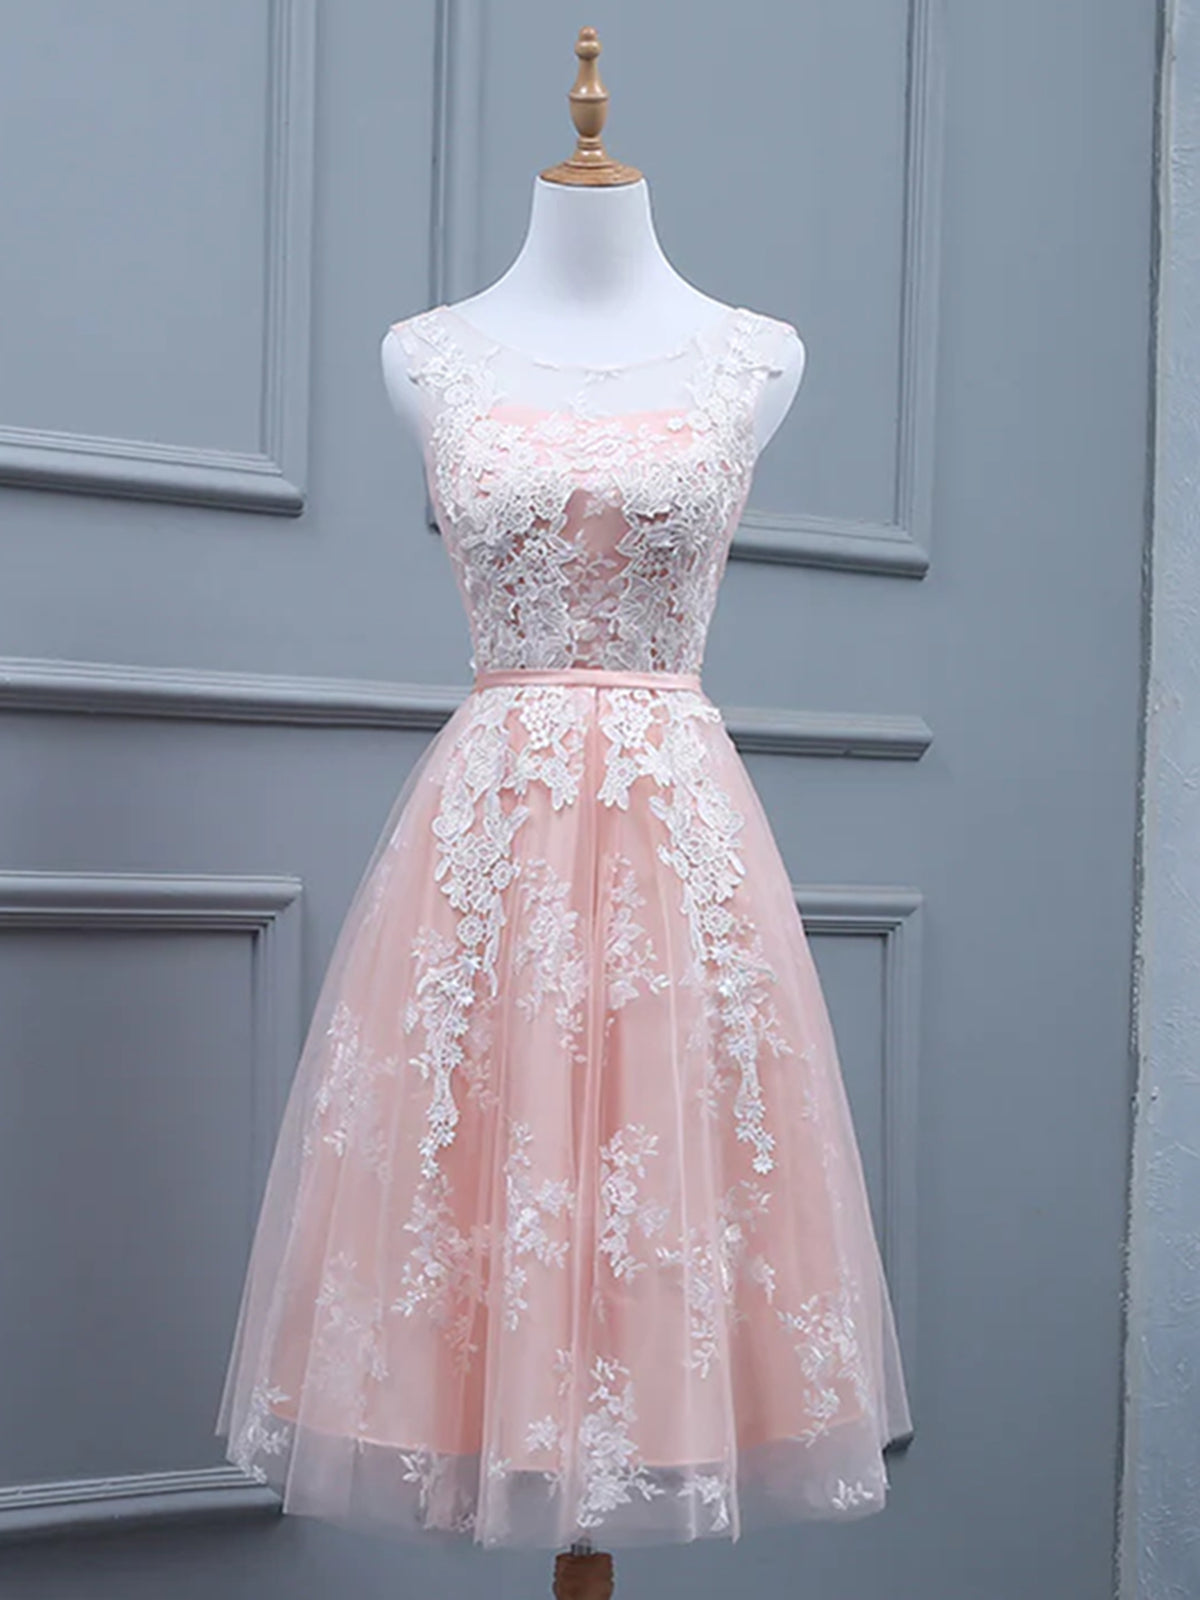 Couture Gown, Light Pink Short Lace Prom Dresses, Light Pink Short Lace Graduation Homecoming Dresses